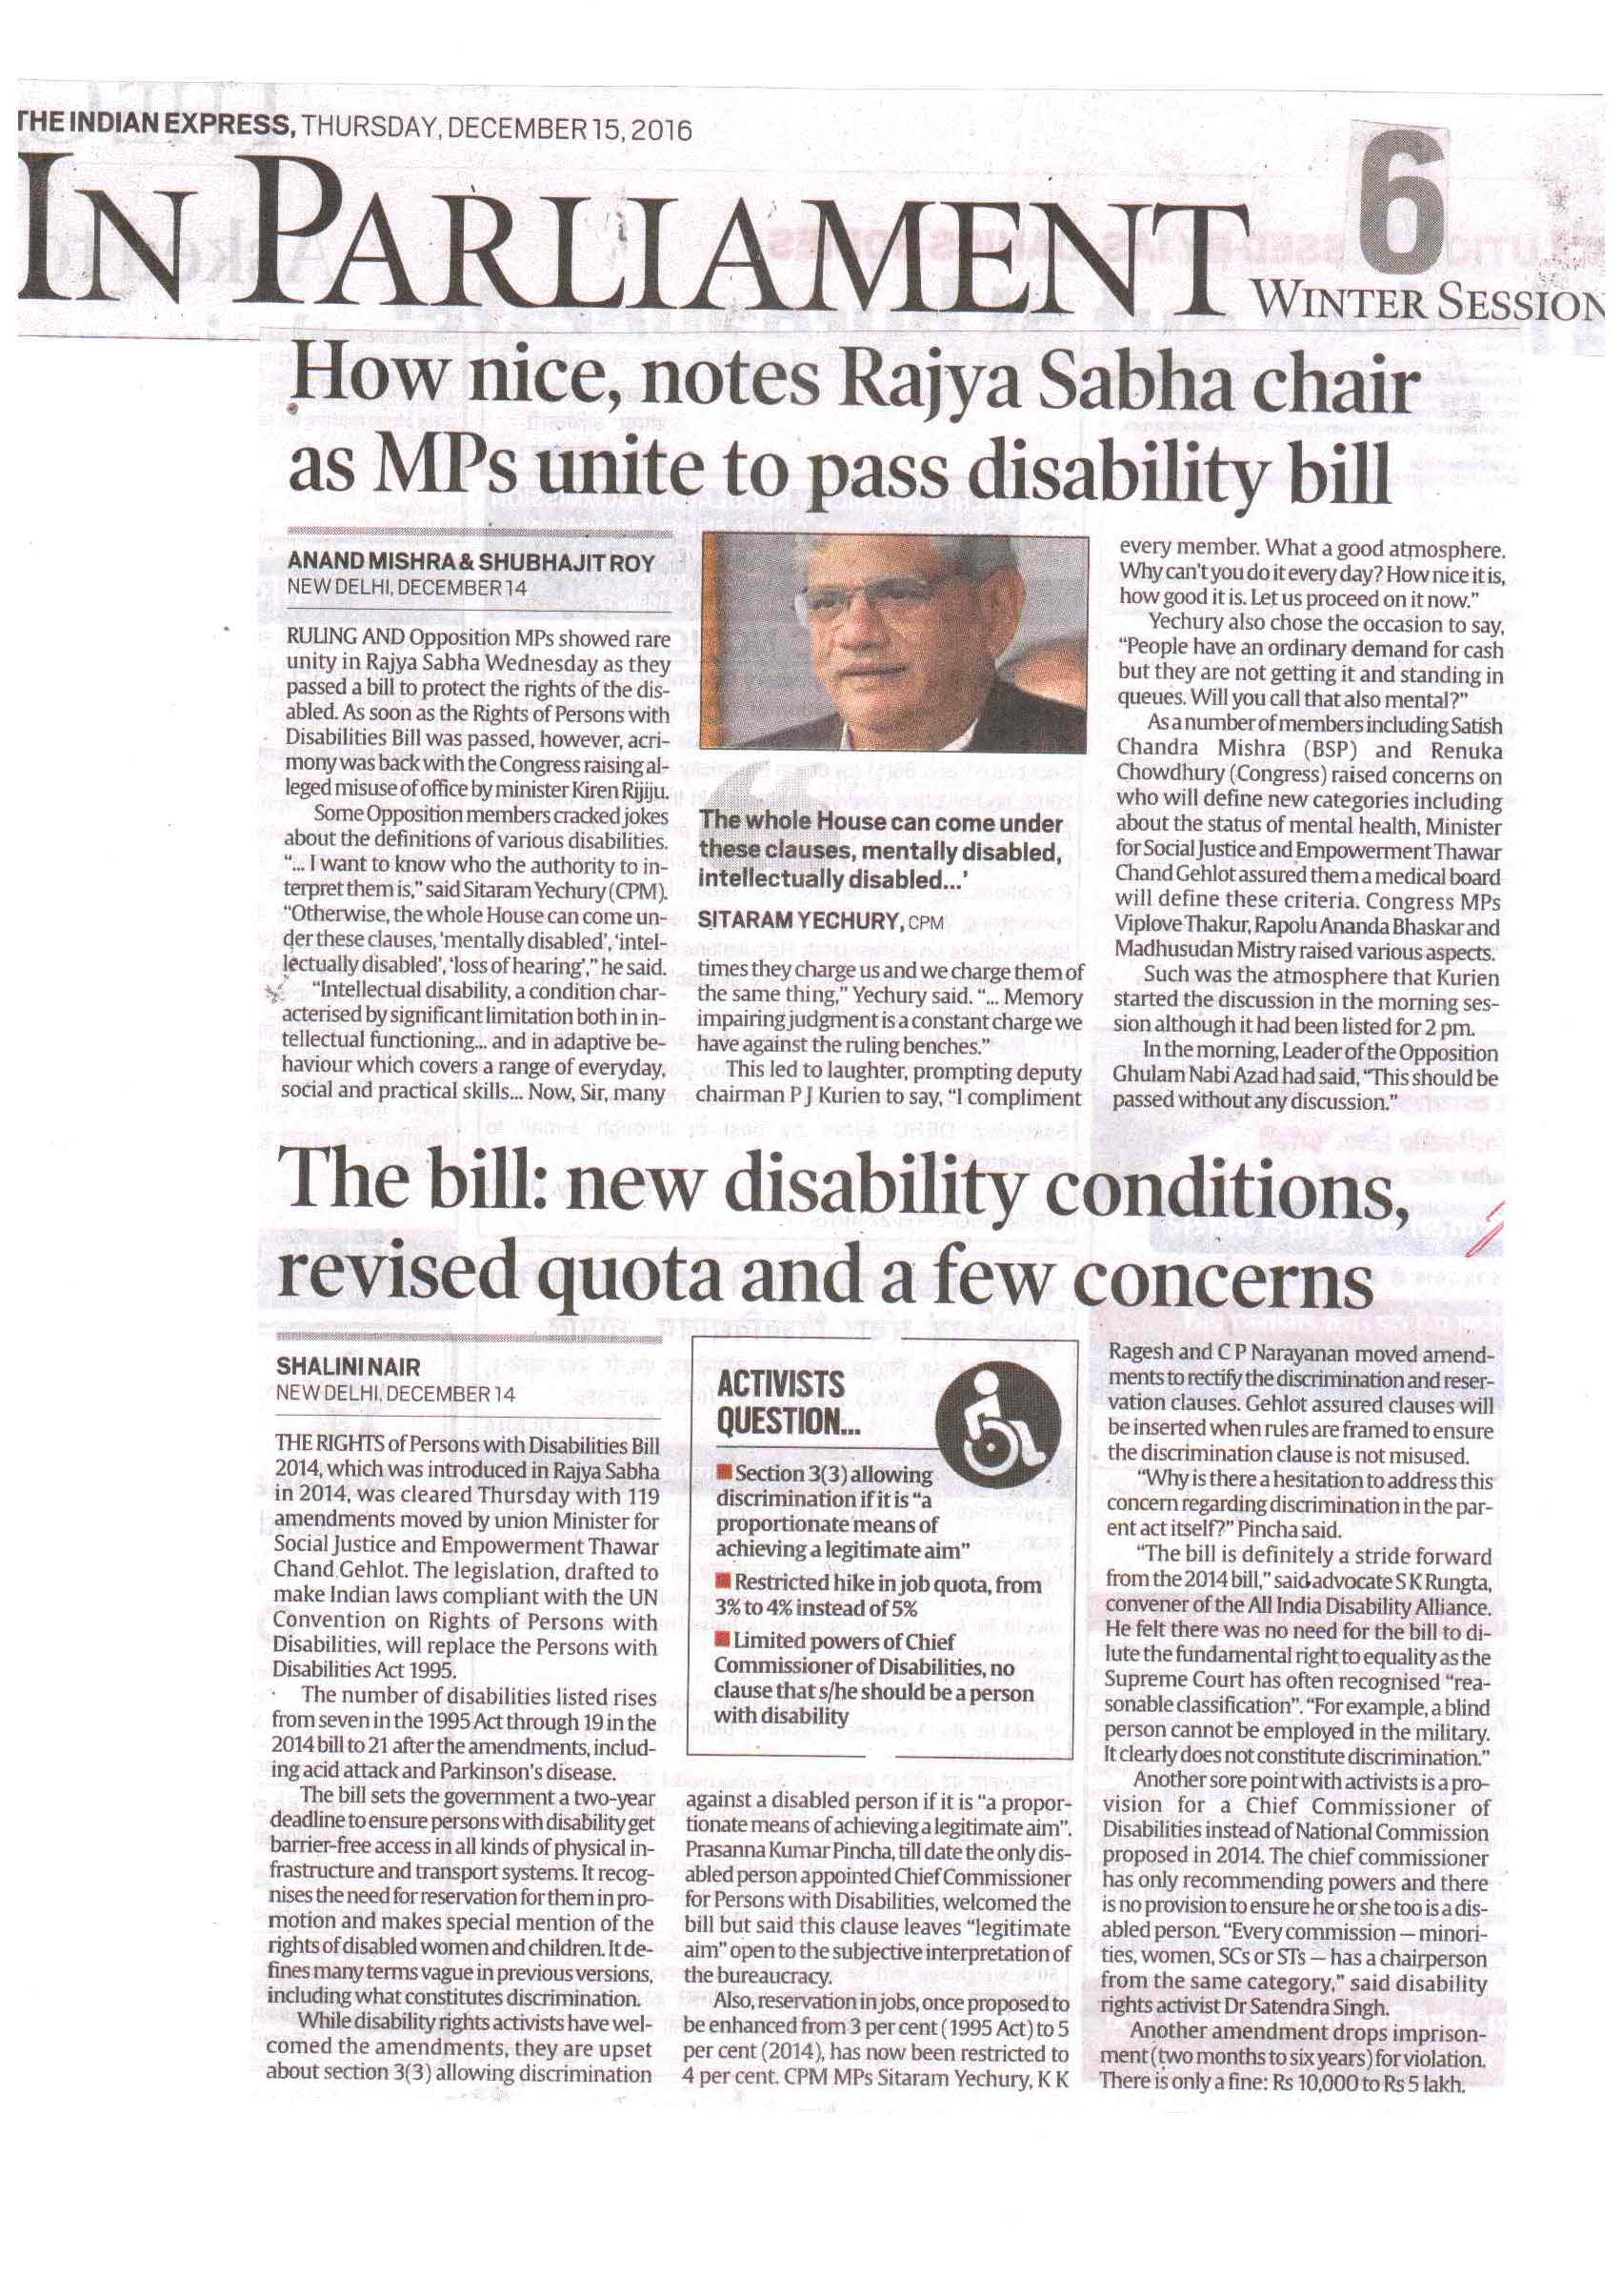 How nice, notes Rajya Sabha chair as MPs unite to pass disability bill